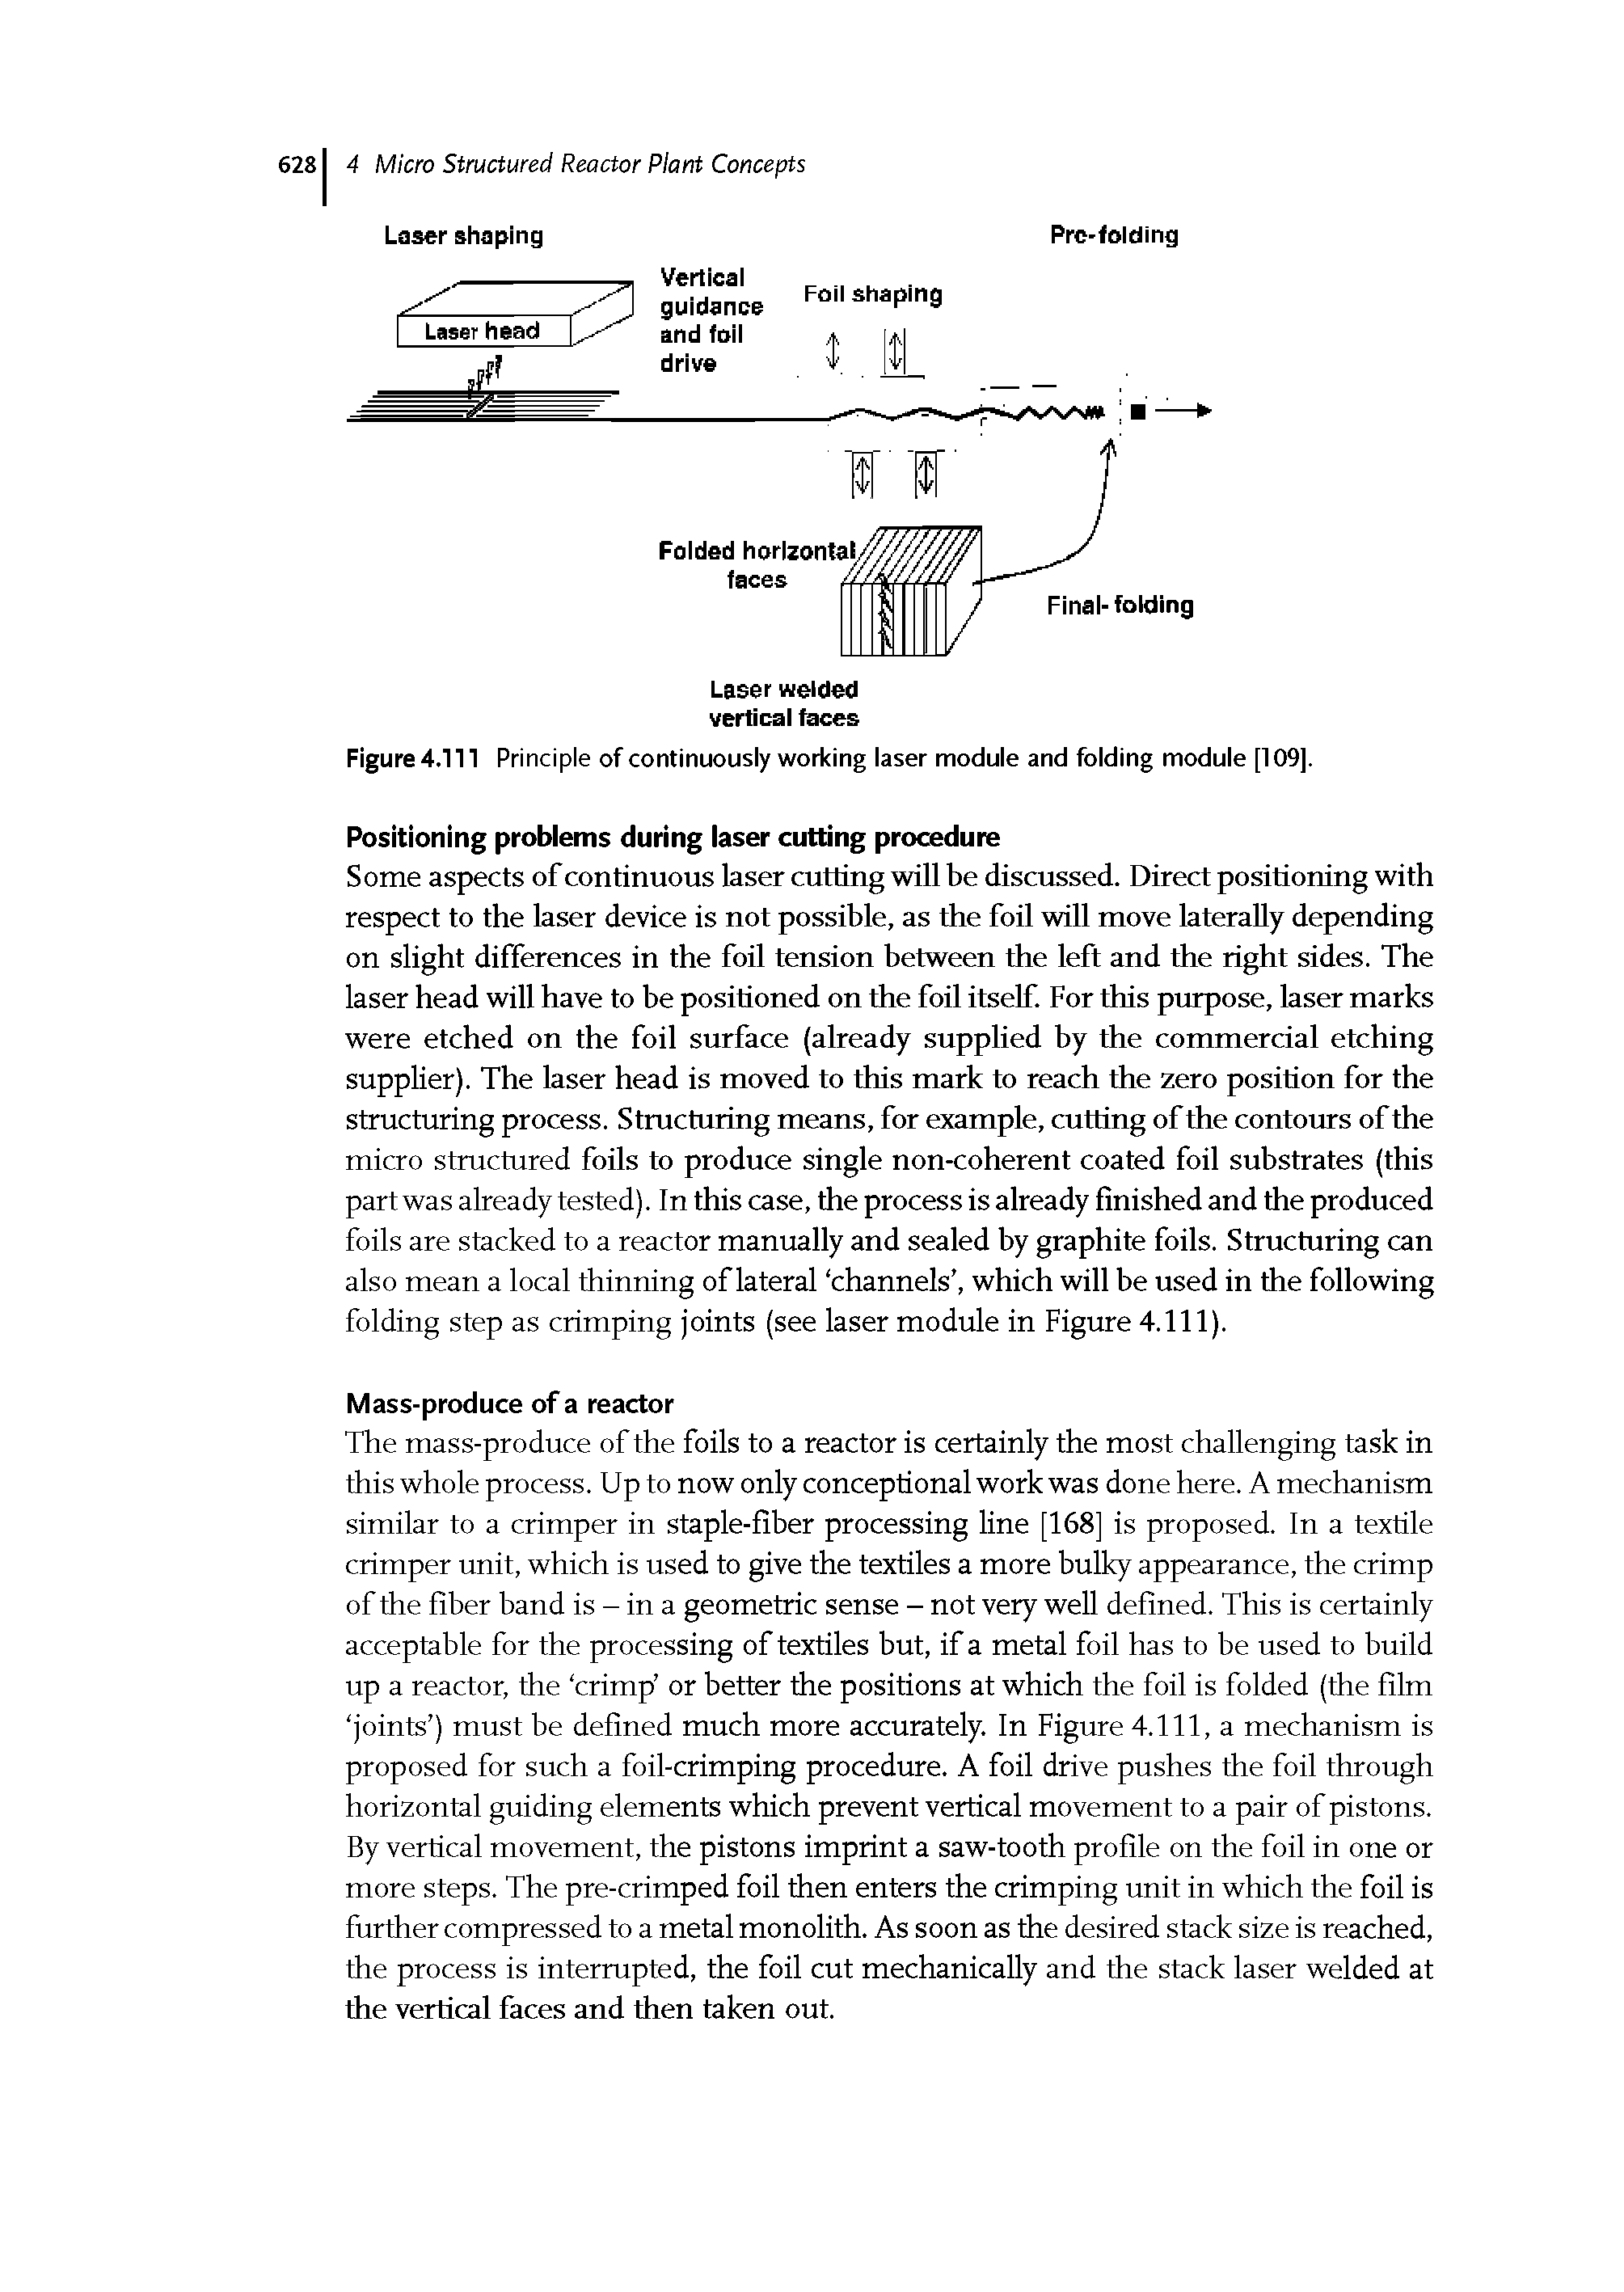 Figure 4.111 Principle of continuously working laser module and folding module [109].